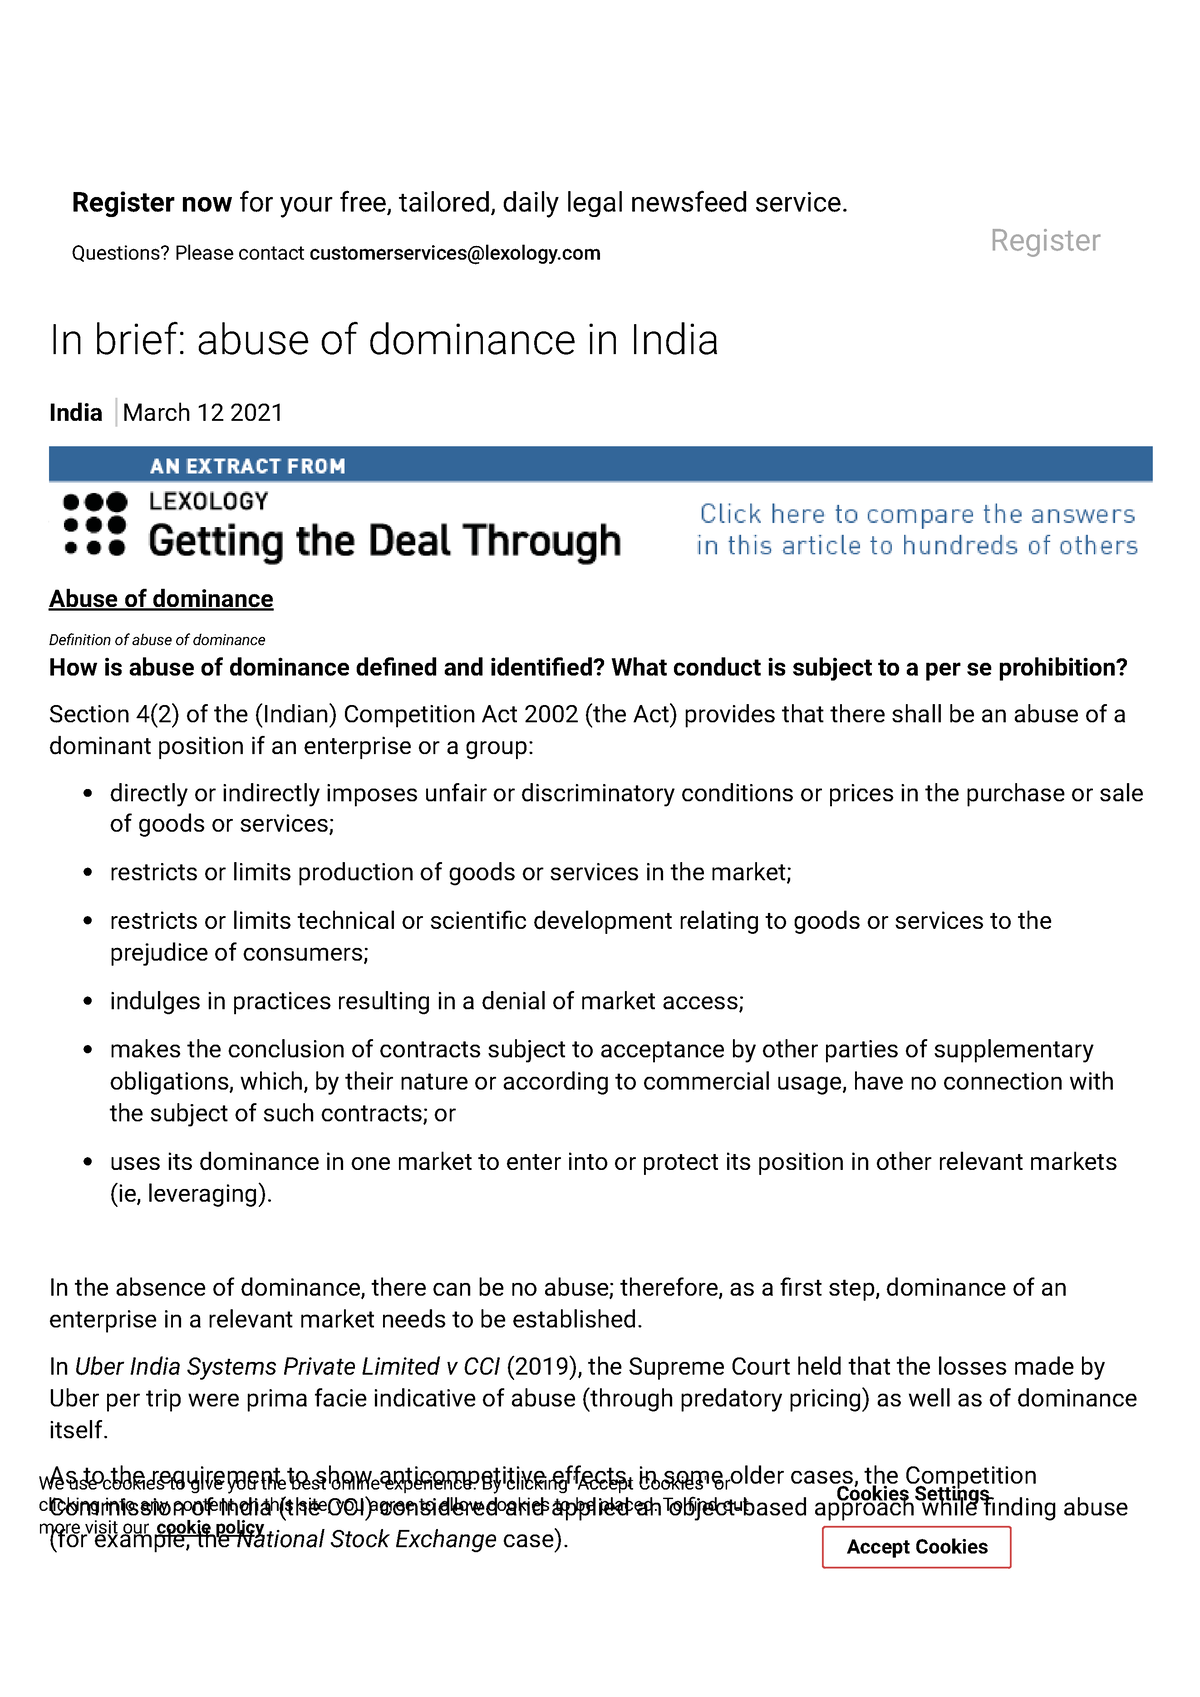 research paper on abuse of dominant position in india